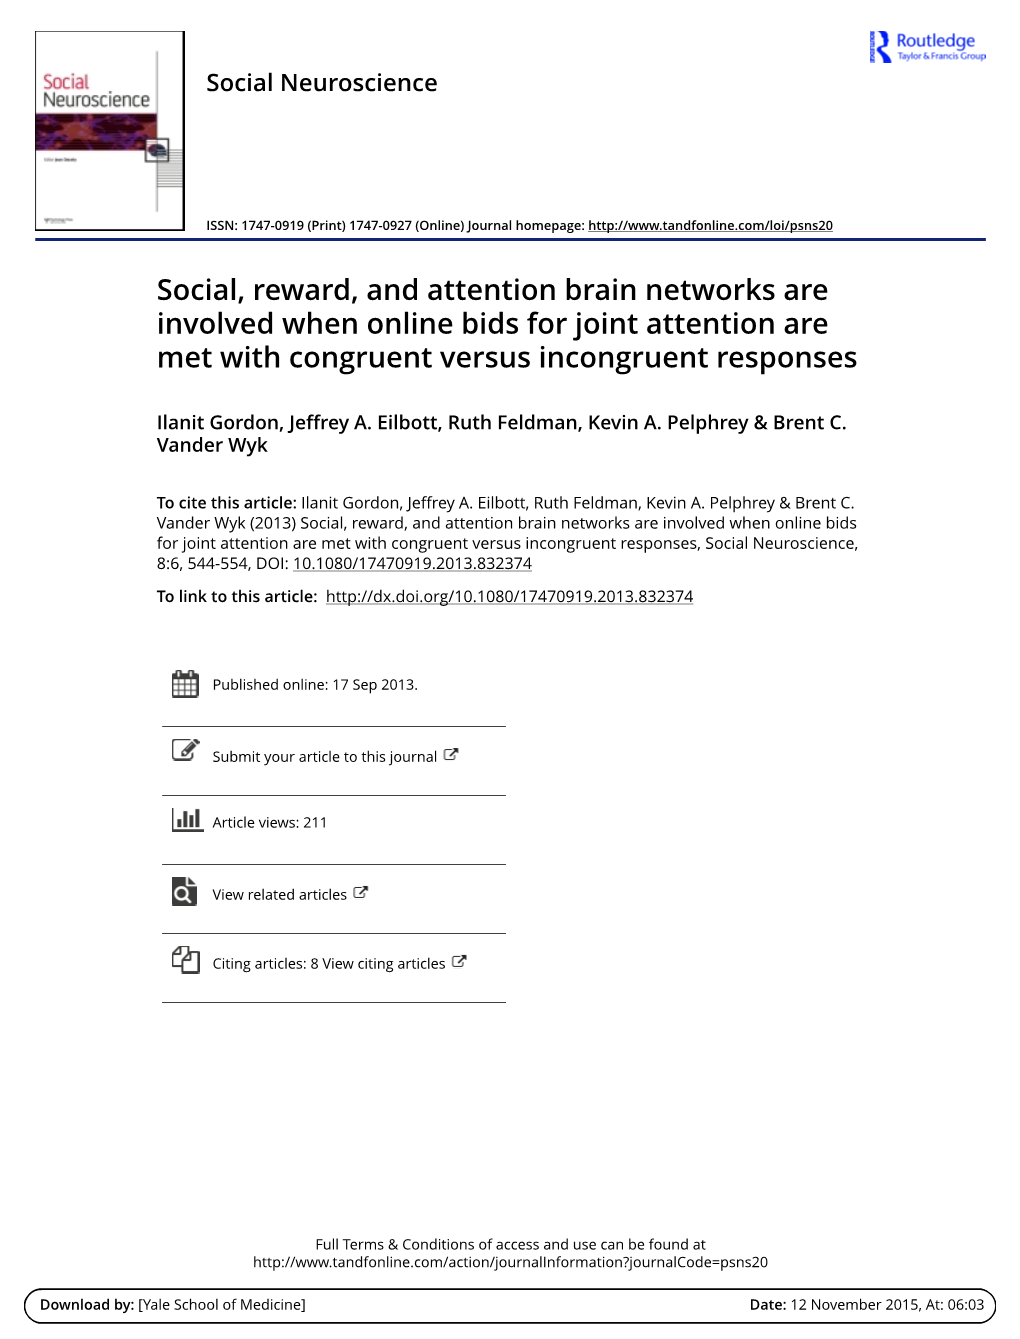 Social, Reward, and Attention Brain Networks Are Involved When Online Bids for Joint Attention Are Met with Congruent Versus Incongruent Responses